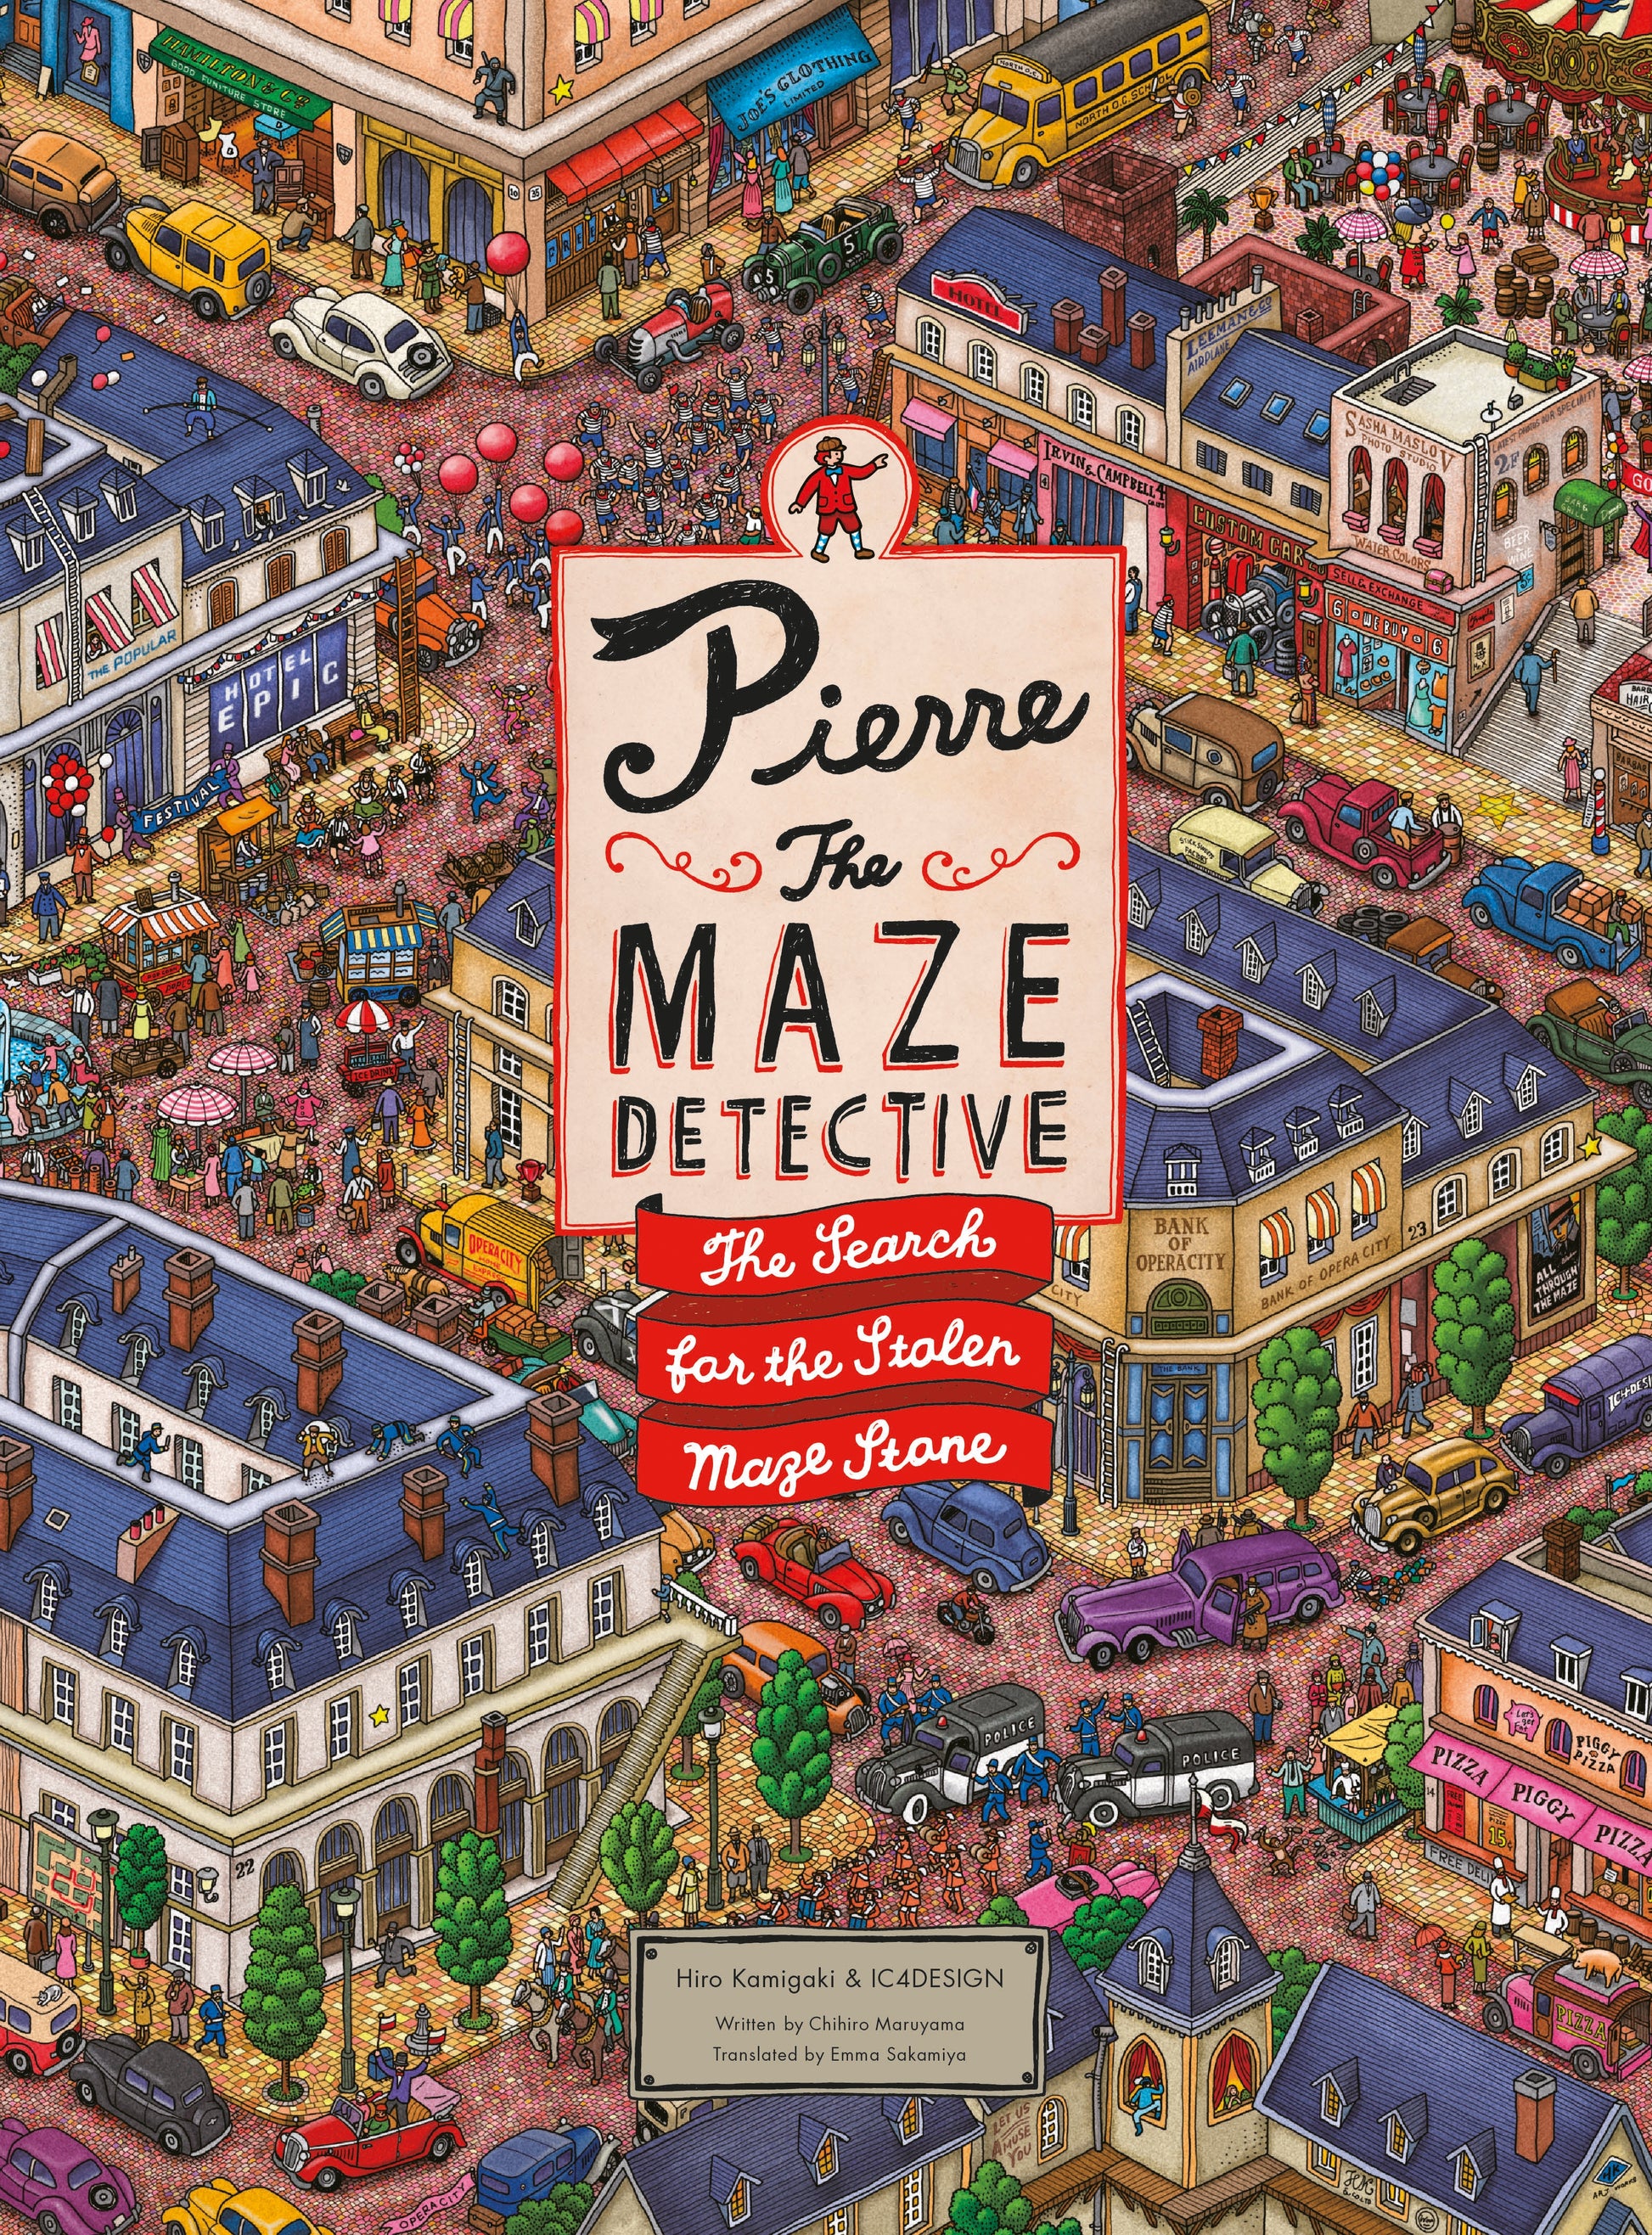 Pierre the Maze Detective: The Search for the Stolen Maze Stone by Hiro Kamigaki